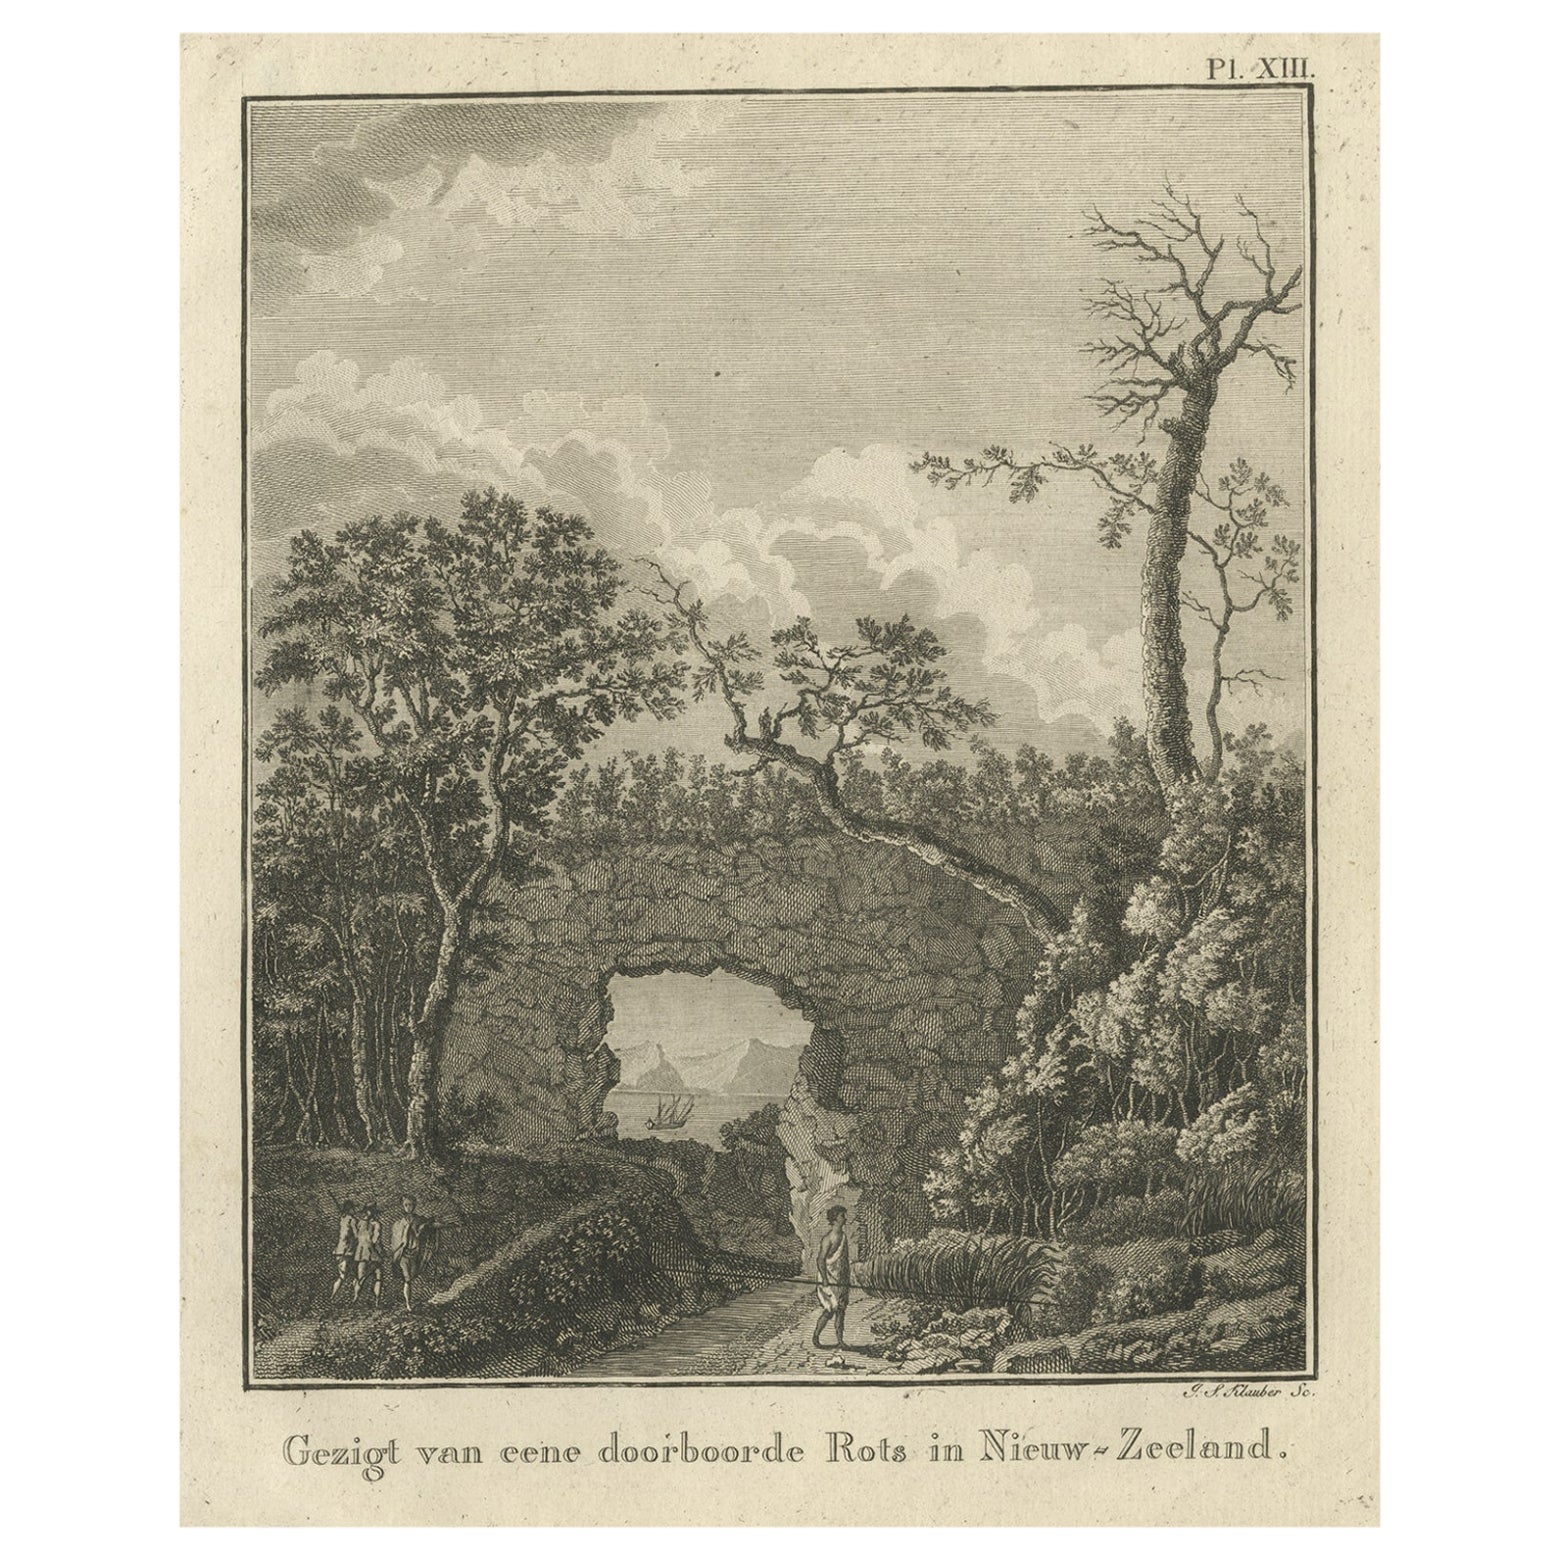 Antique Print of a Landscape with Rock Formation in New Zealand by Cook, 1803